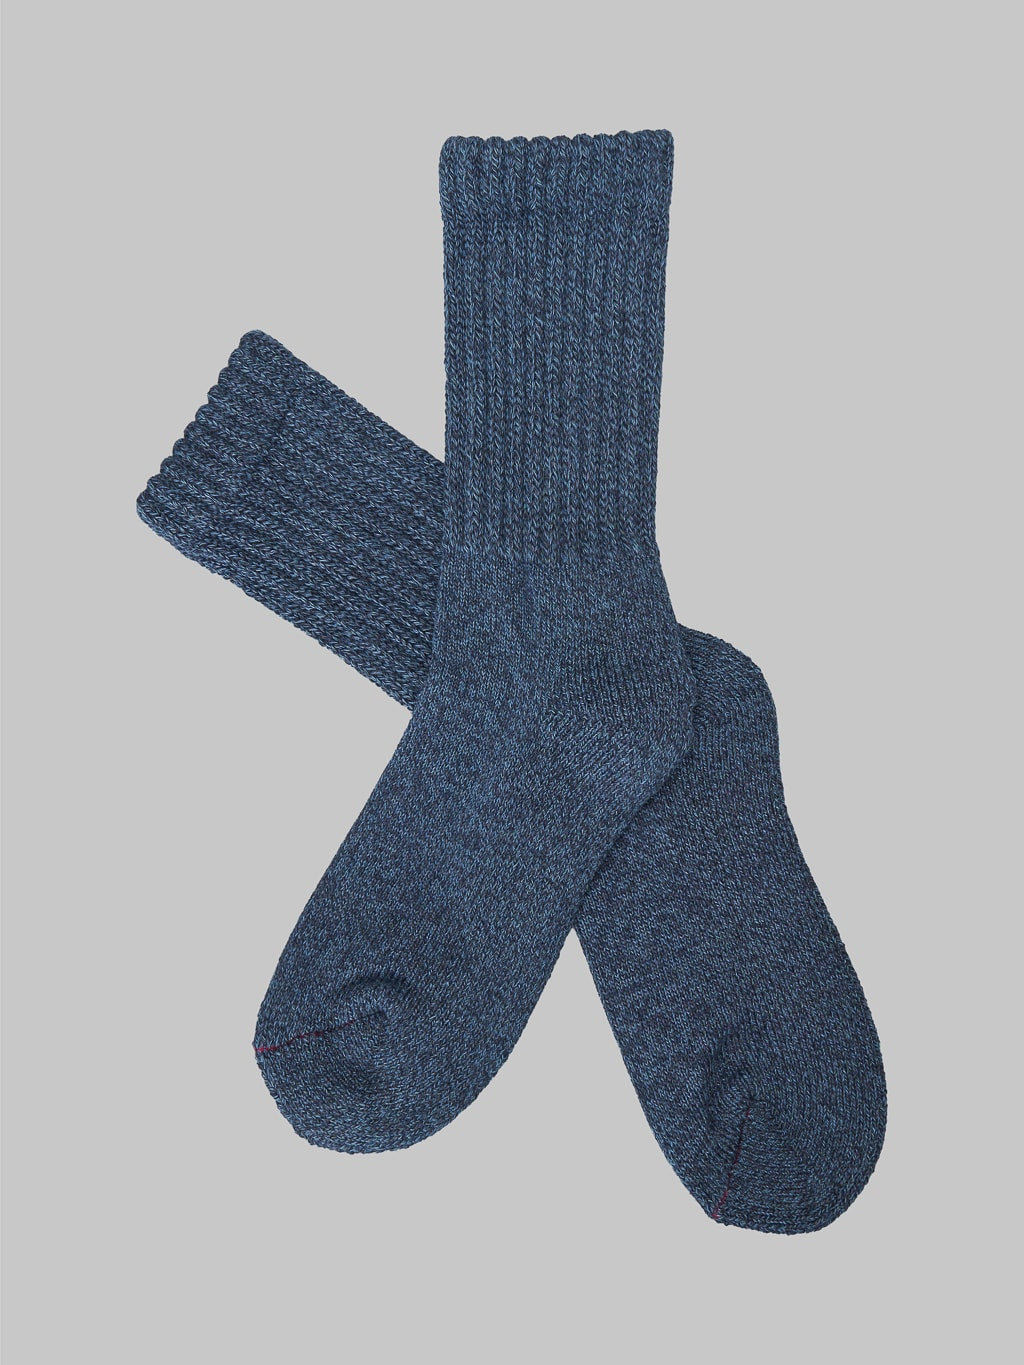 ROTOTO Loose Pile Crew Socks Mix Navy made in japan